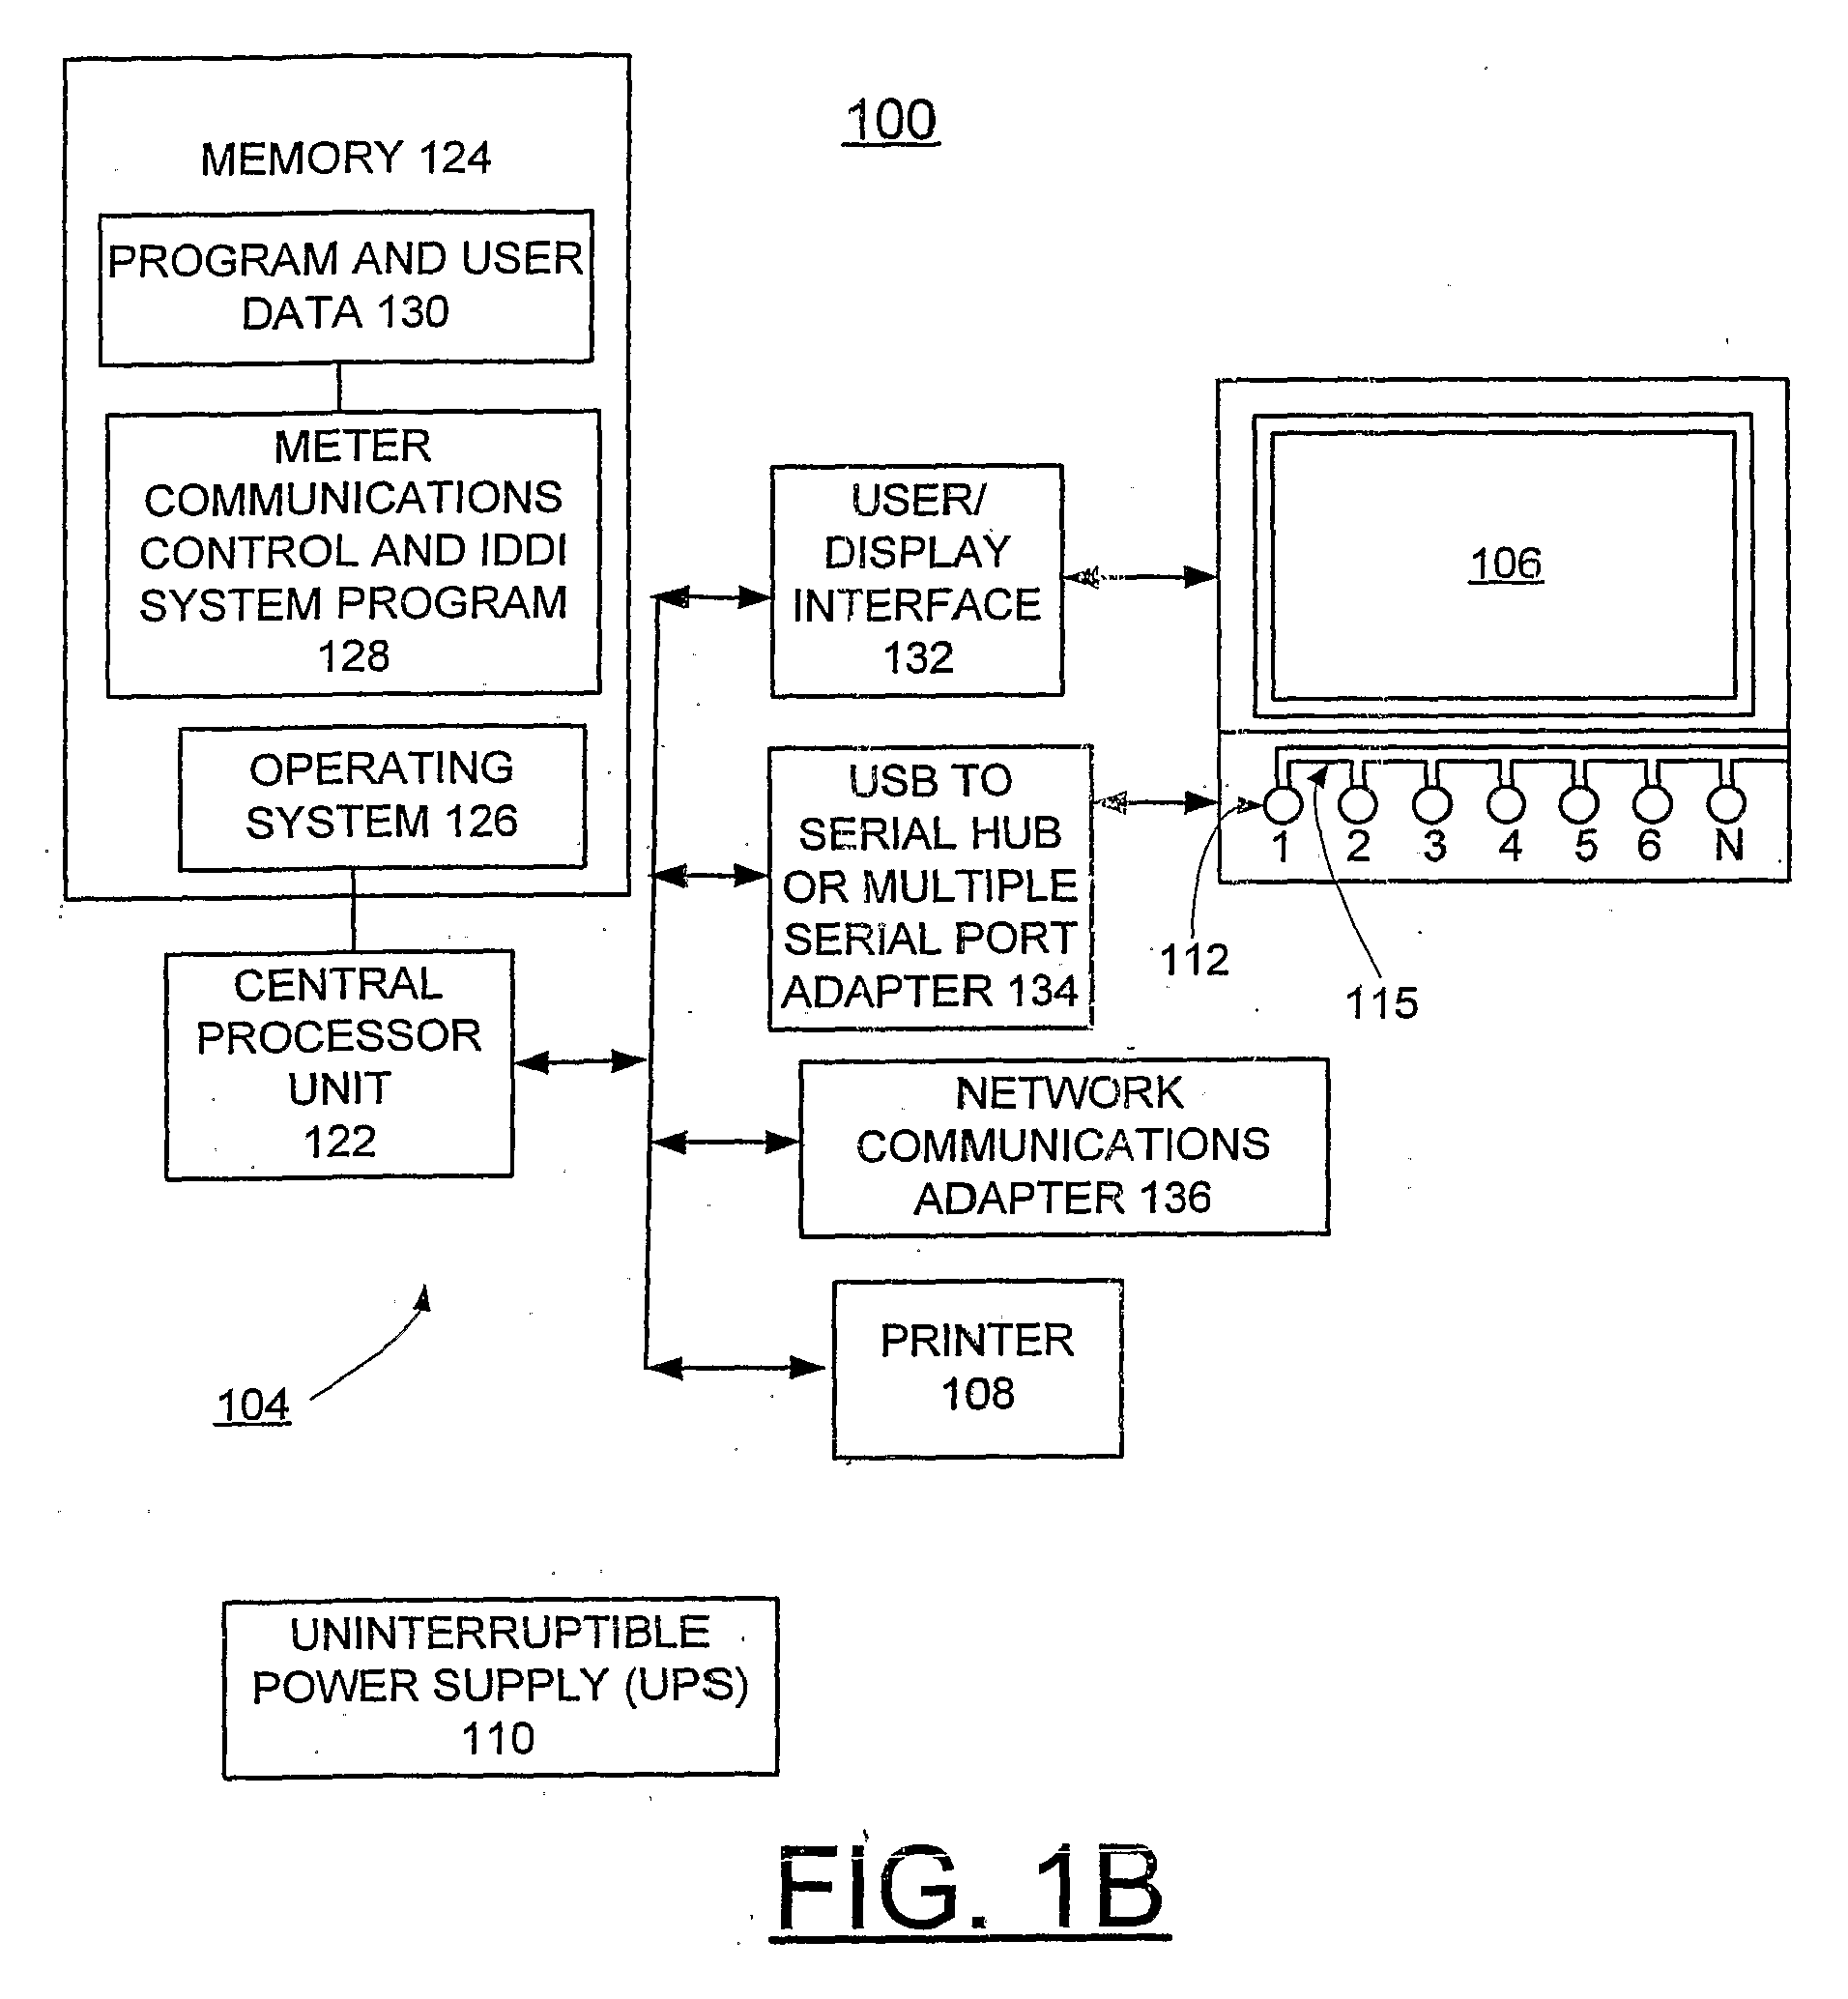 Method and Apparatus for Implementing Patient Data Download for Multiple Different Meter Types